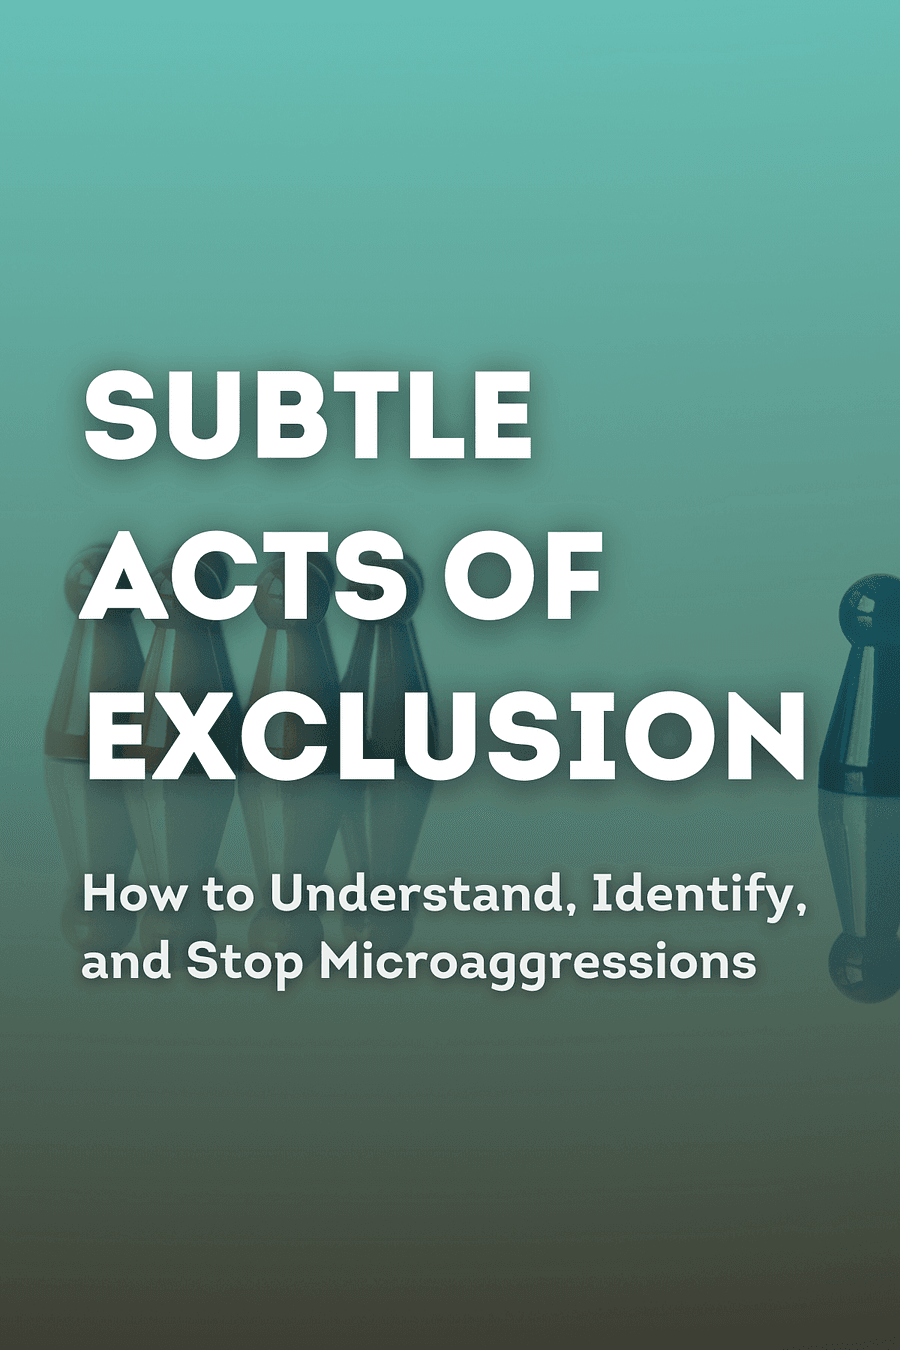 Subtle Acts of Exclusion by Tiffany Jana, Michael Baran - Book Summary